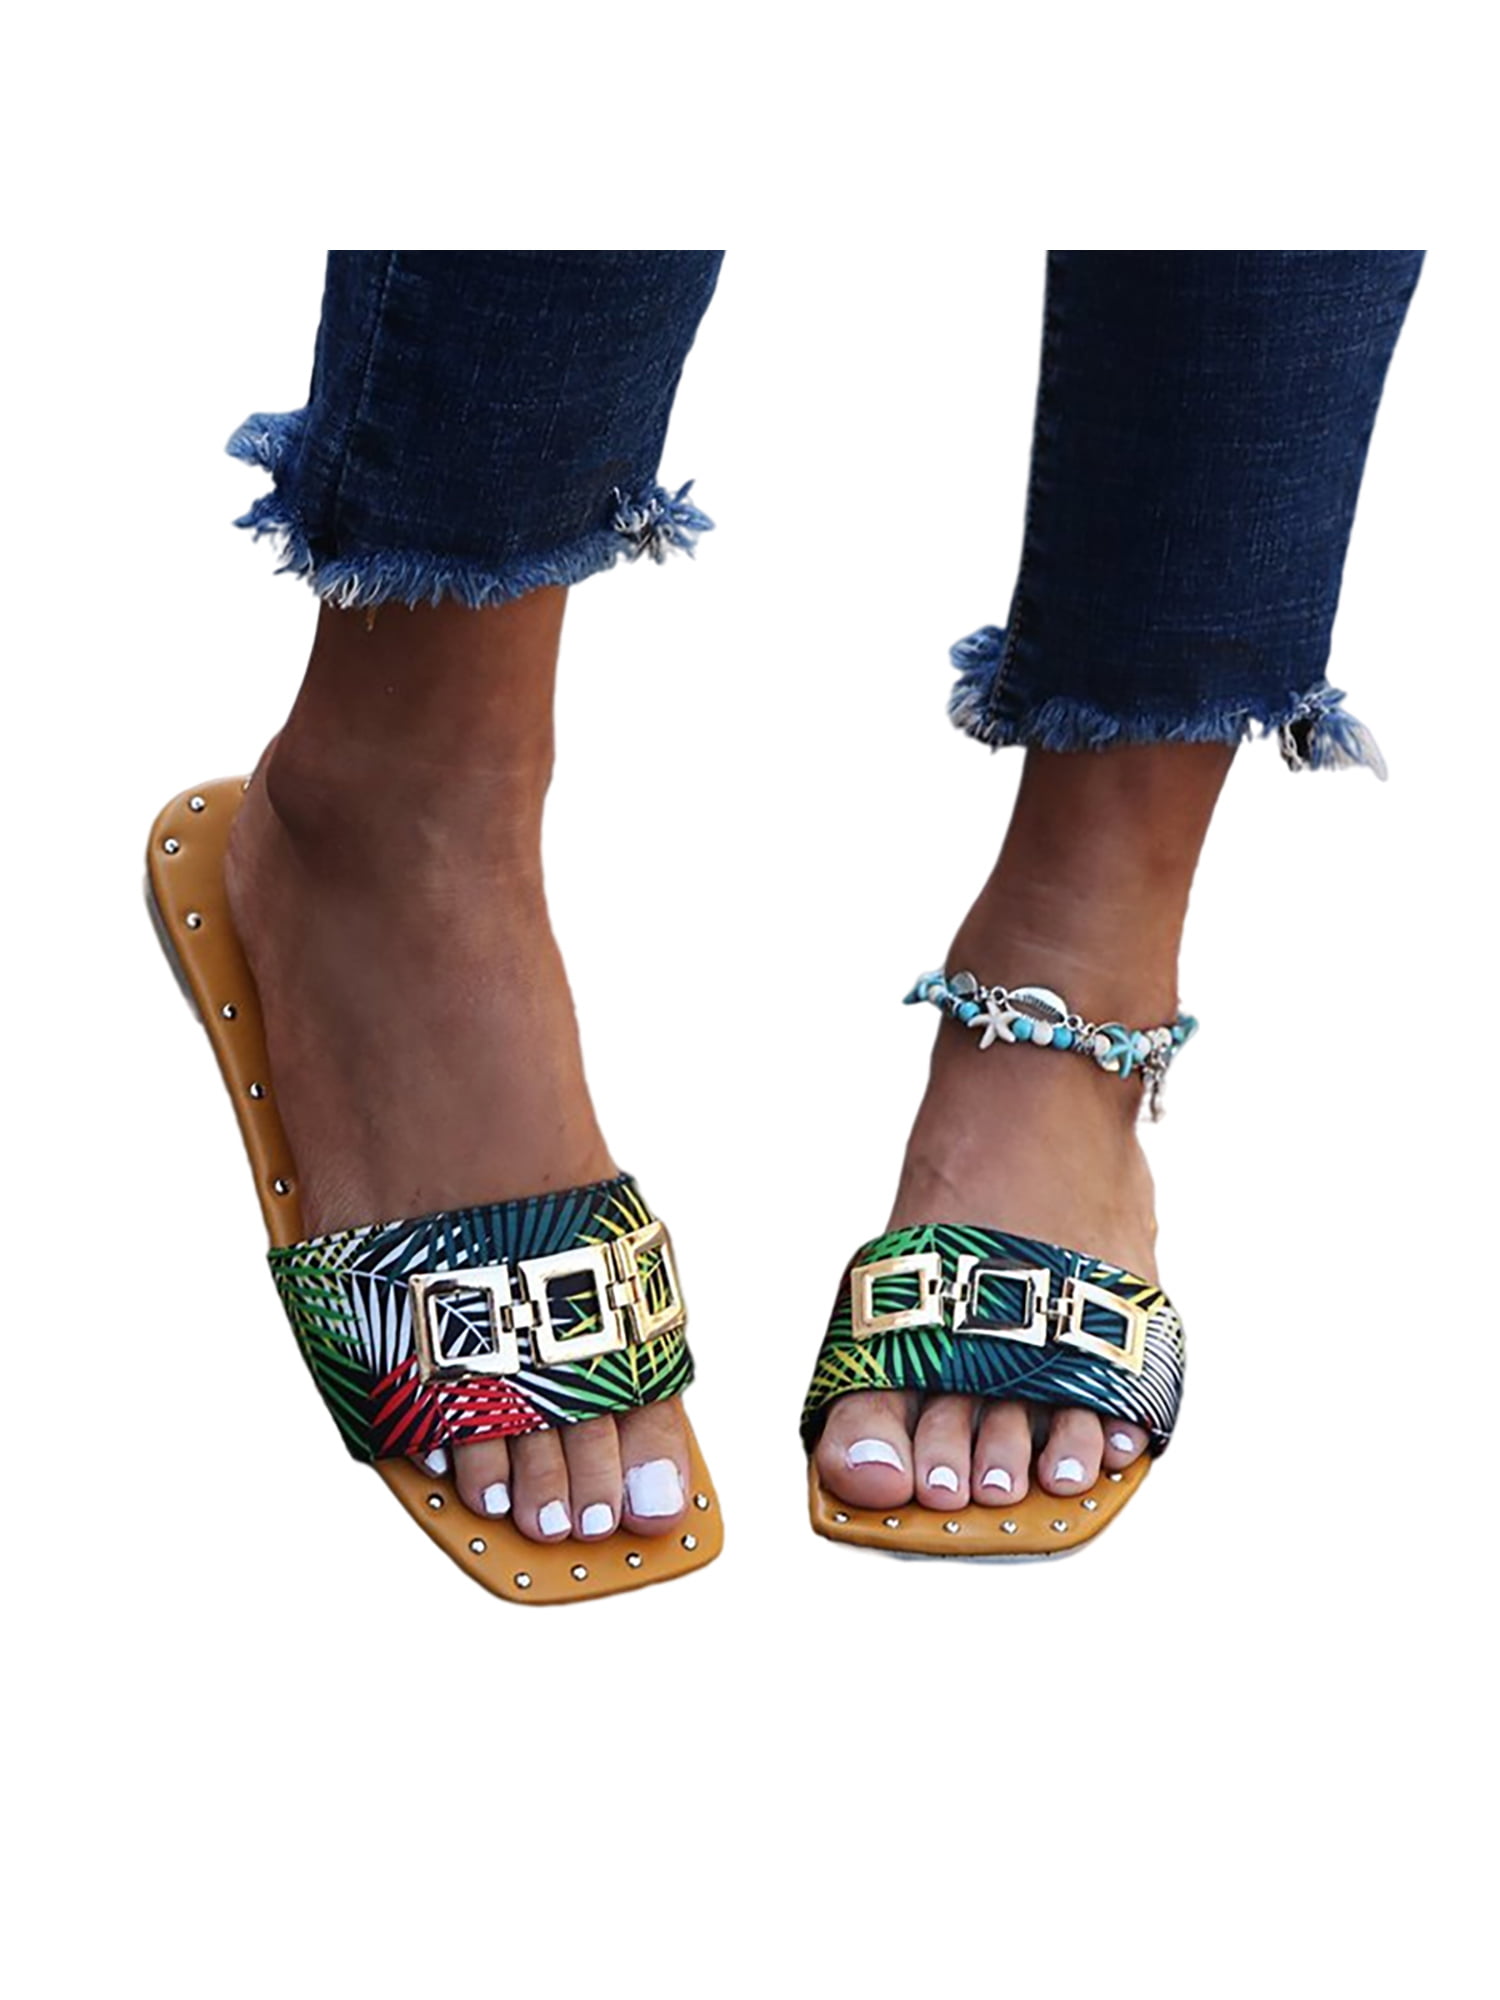 Details about   Women Slippers Shoes Flat Open Toe Multi Color Backless Casual Sandals 